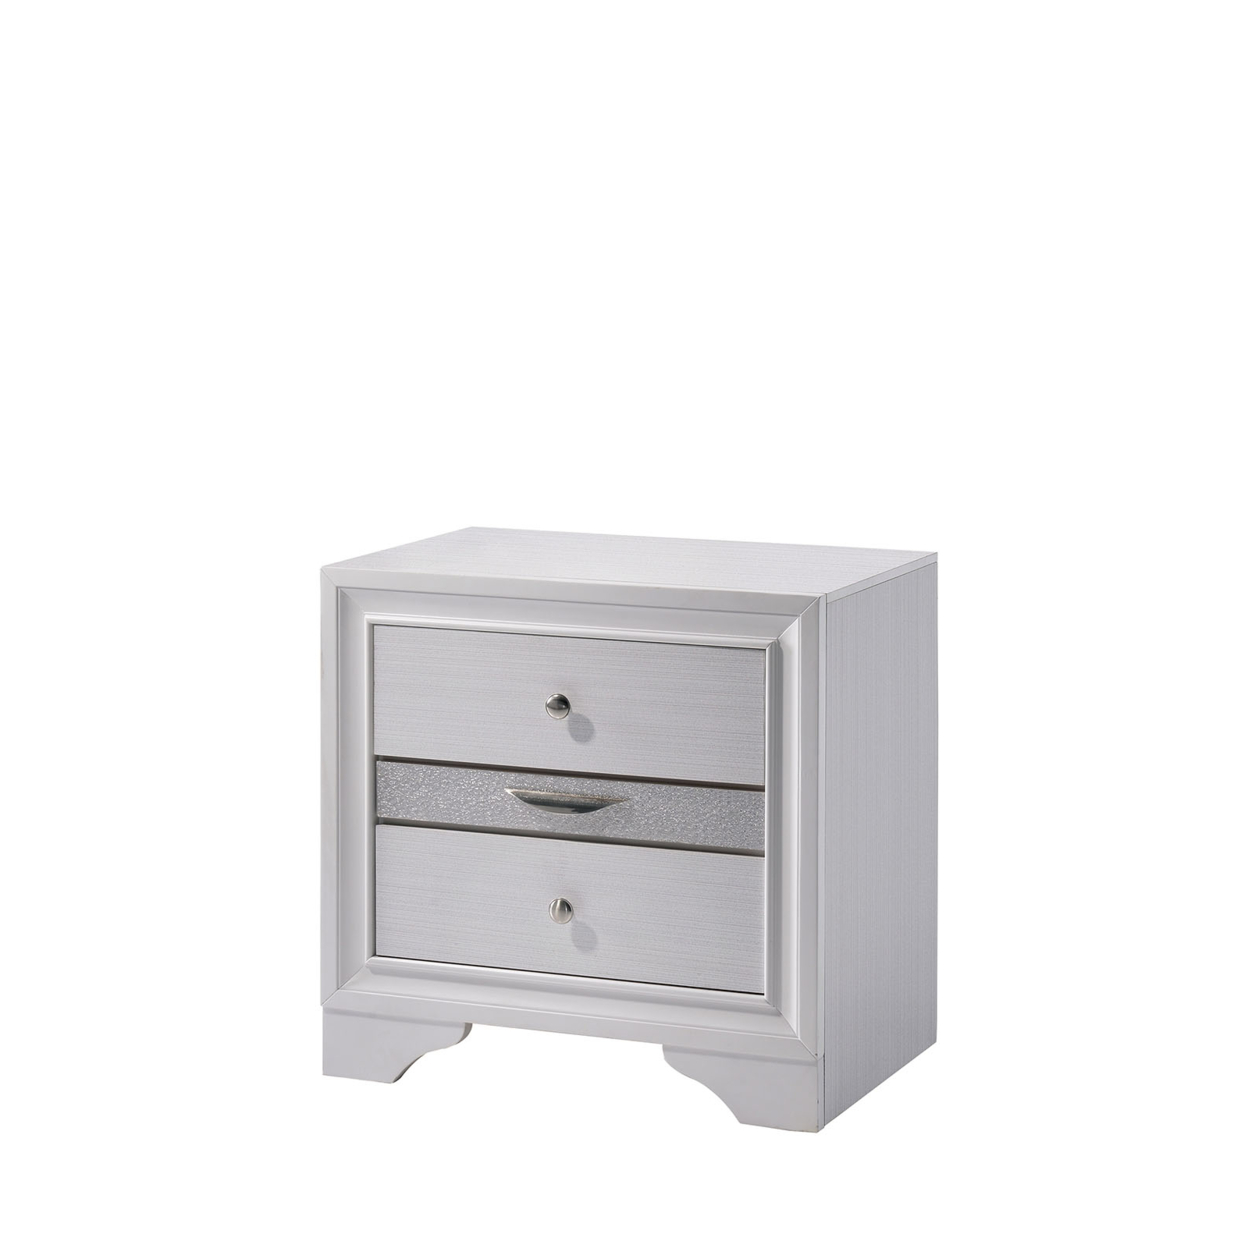 Contemporary Solid Wood Night Stand With Jewelry Drawers, White- Saltoro Sherpi